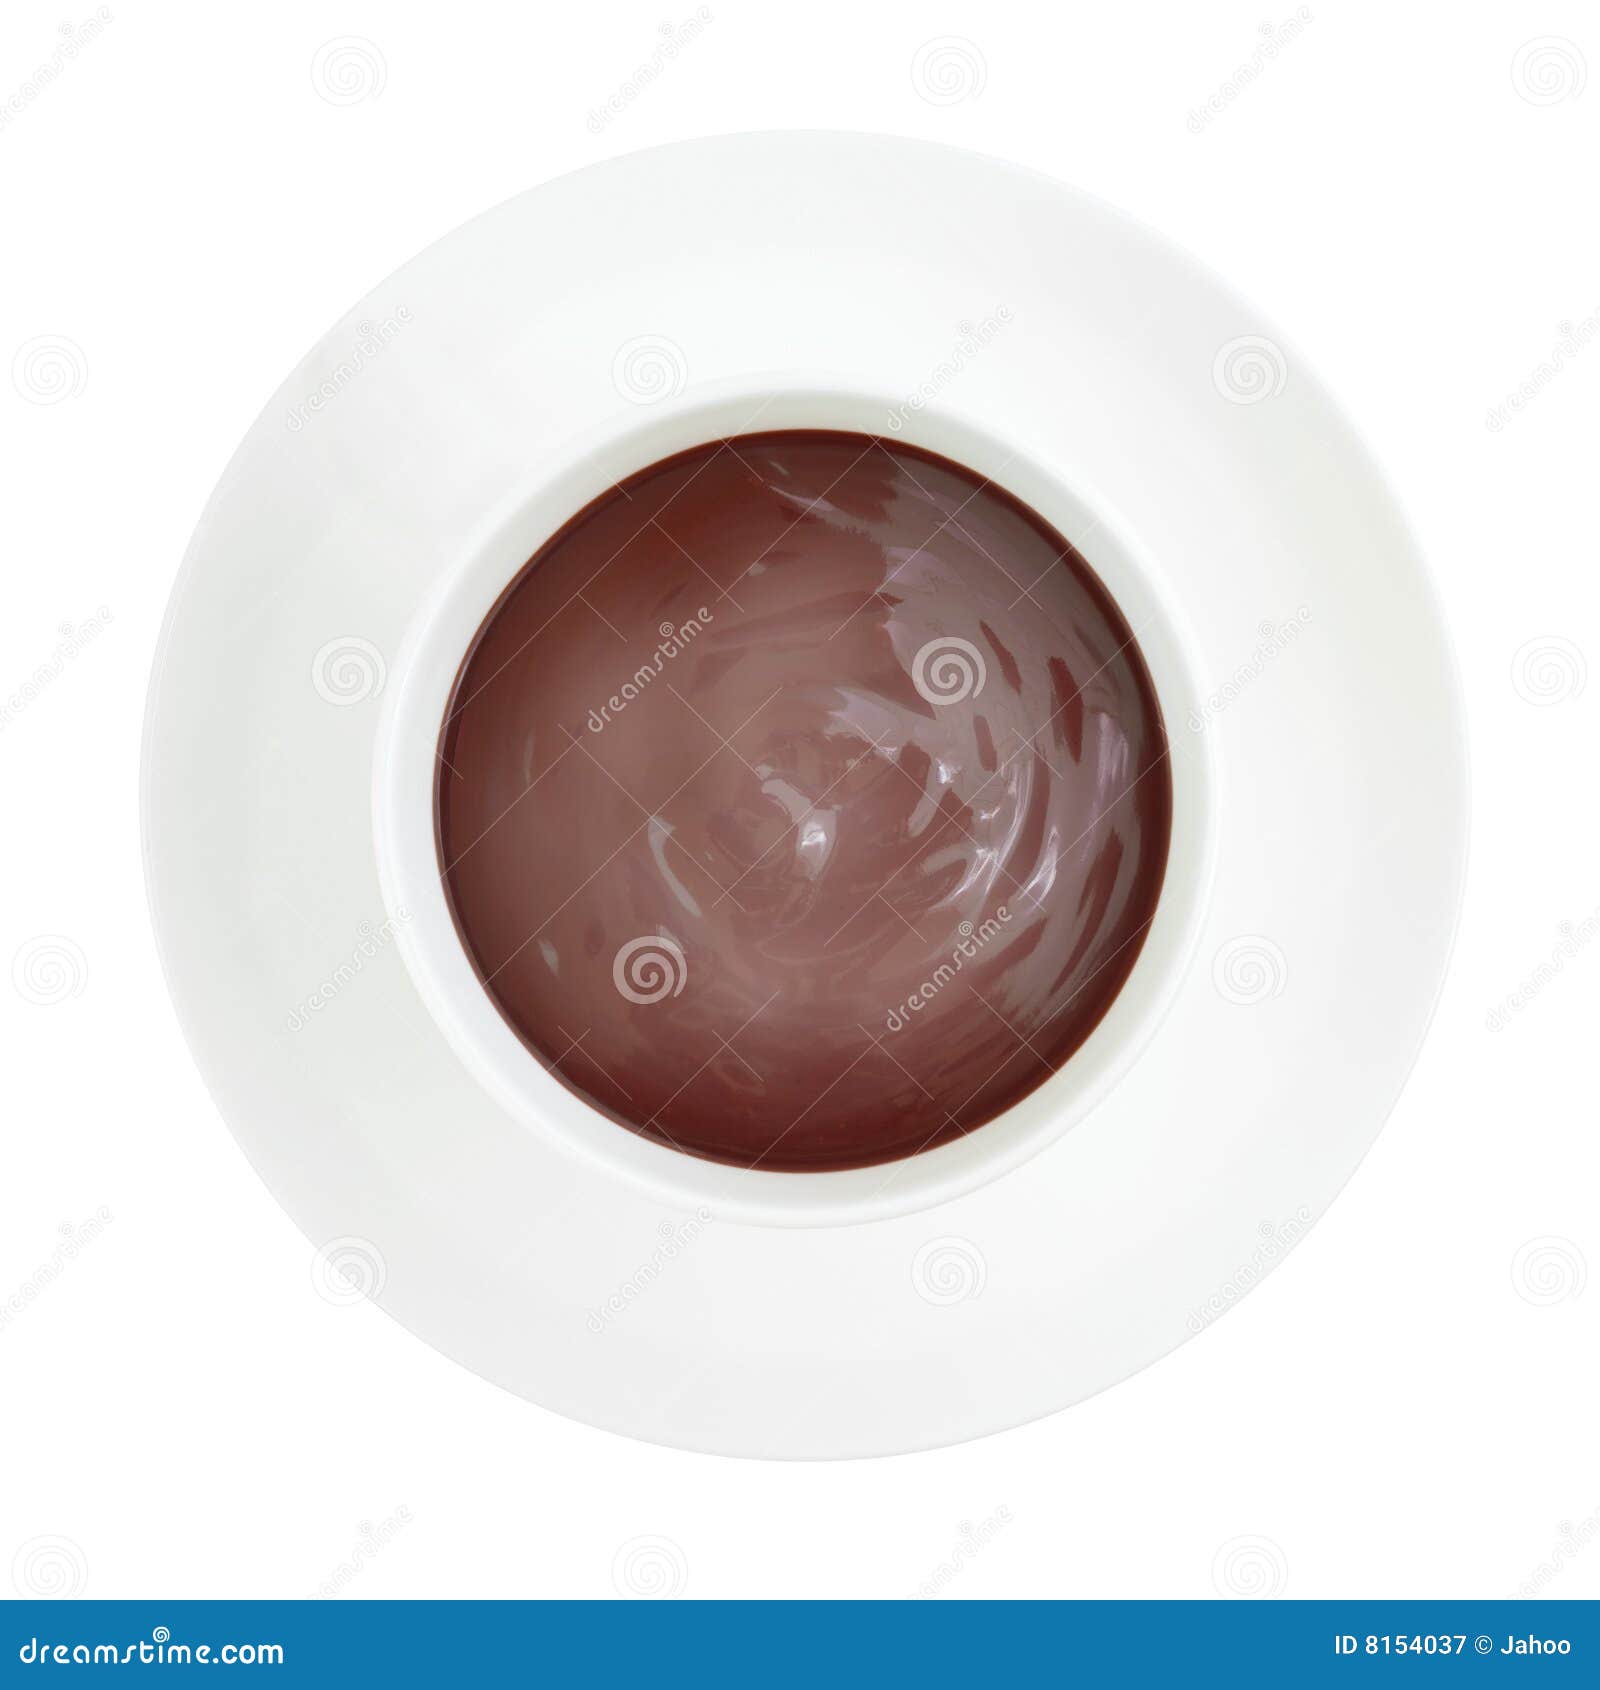 steaming cup of hot chocolate